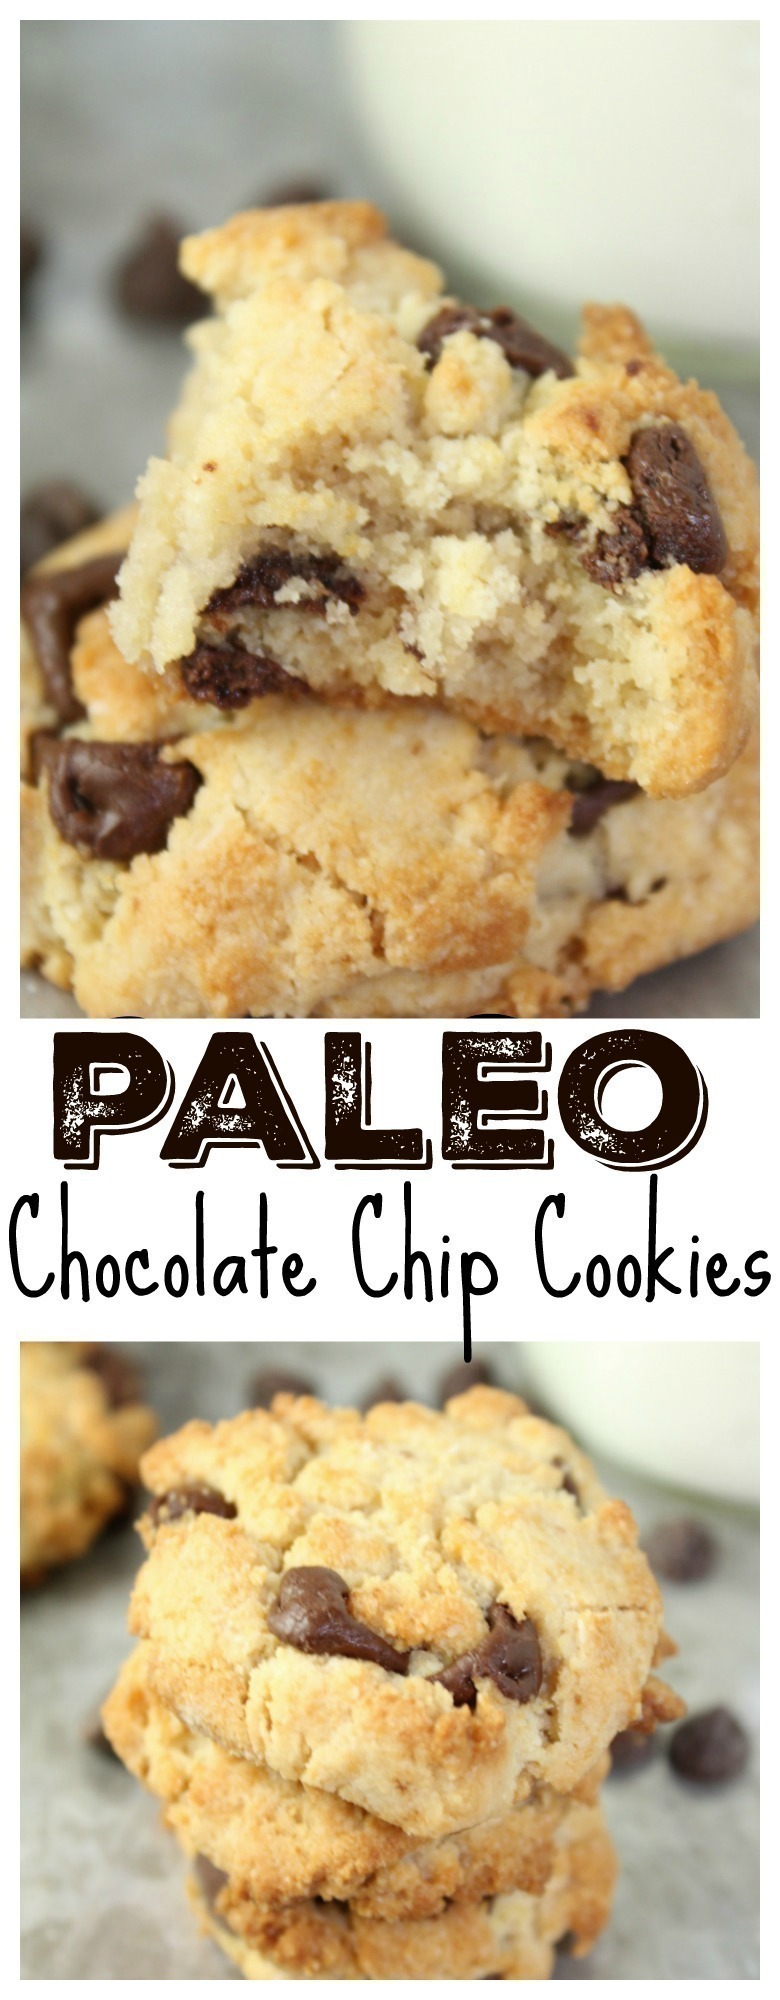 A healthier alternative to the traditional chocolate chip cookie - gluten-free, grain-free, and no refined sugar. They are soft and chocolatey!